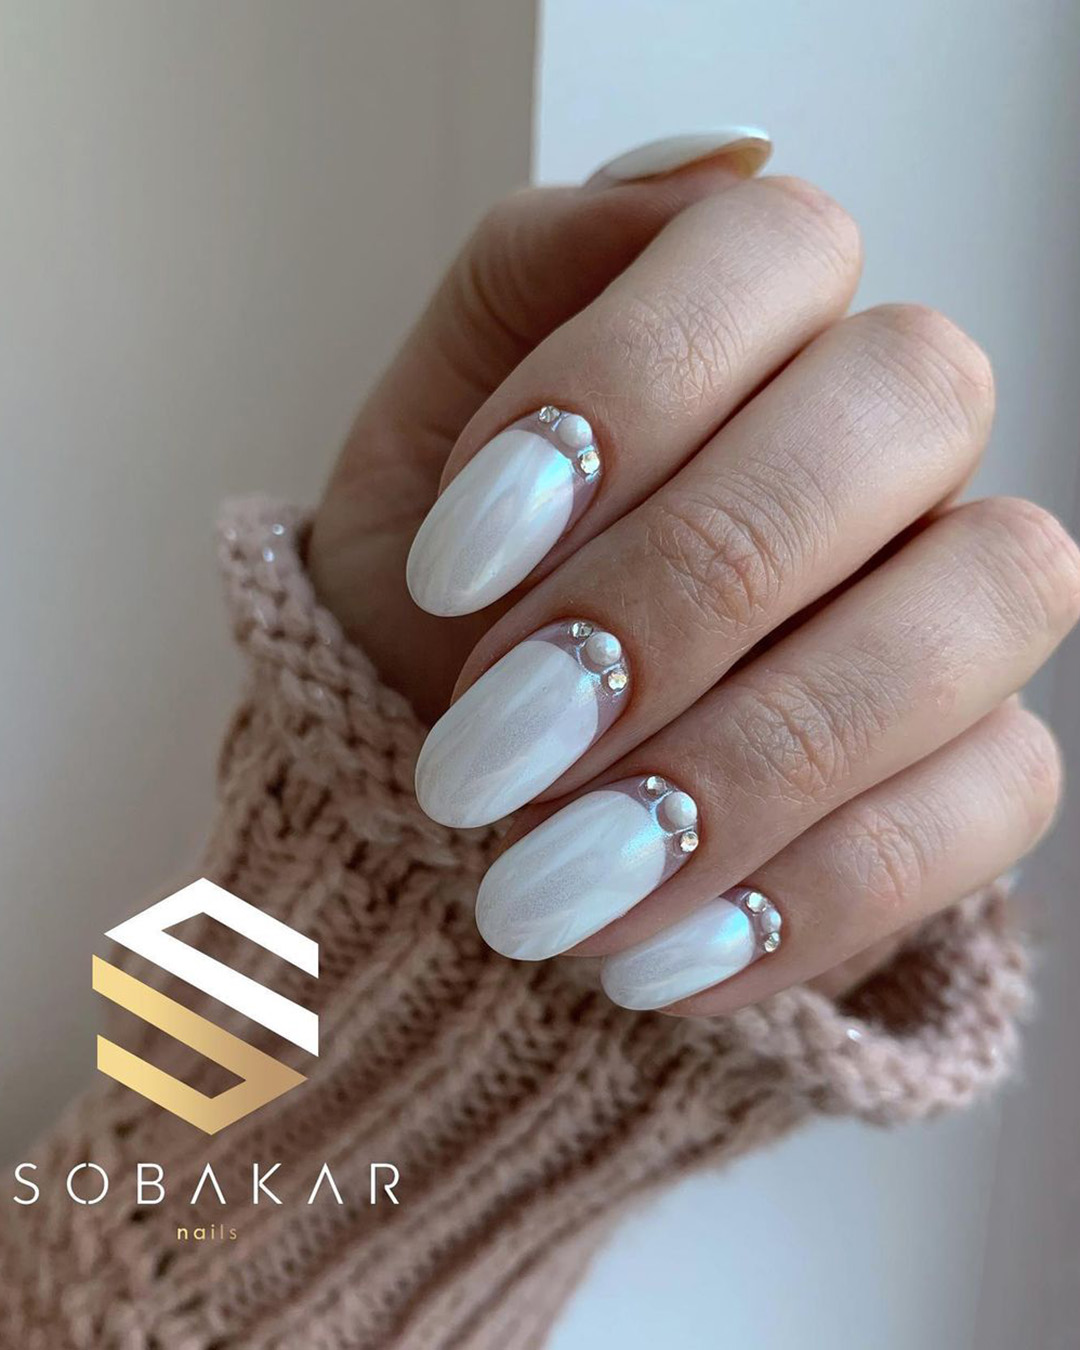 classy wedding nails simple white with pearls sobakar_nails